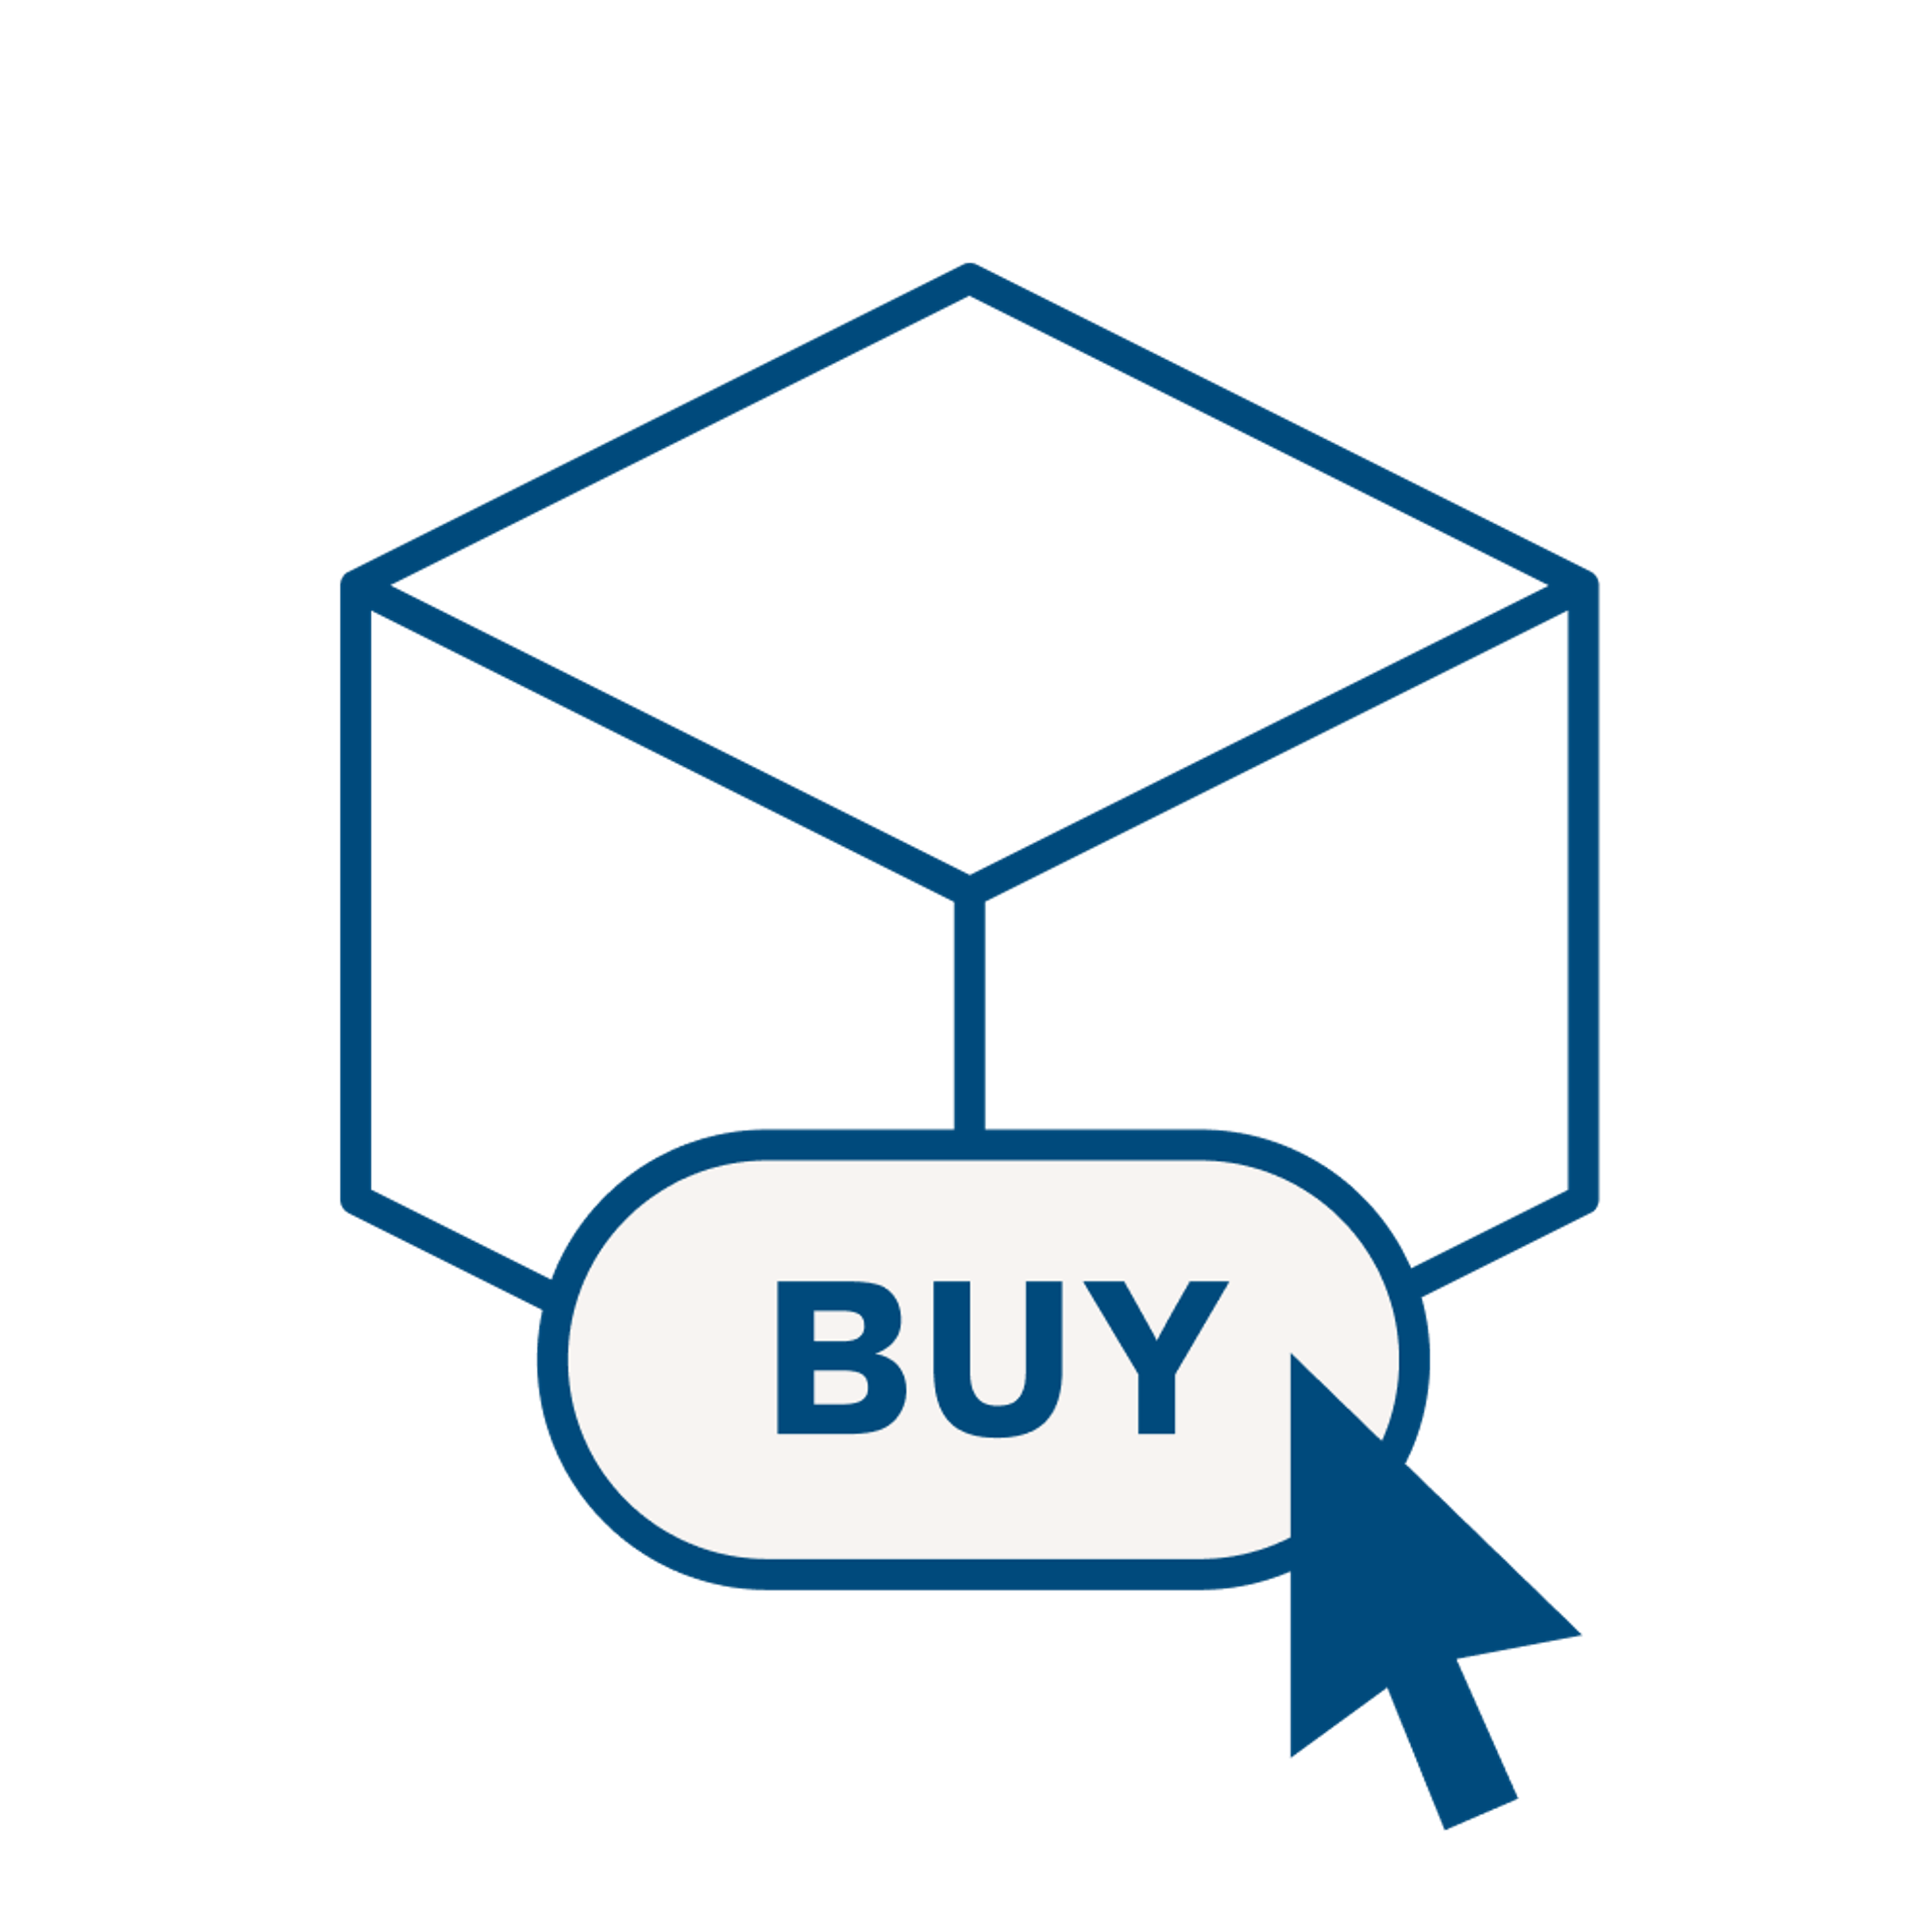 An icon depicting a user clicking 'buy' on a 3D box